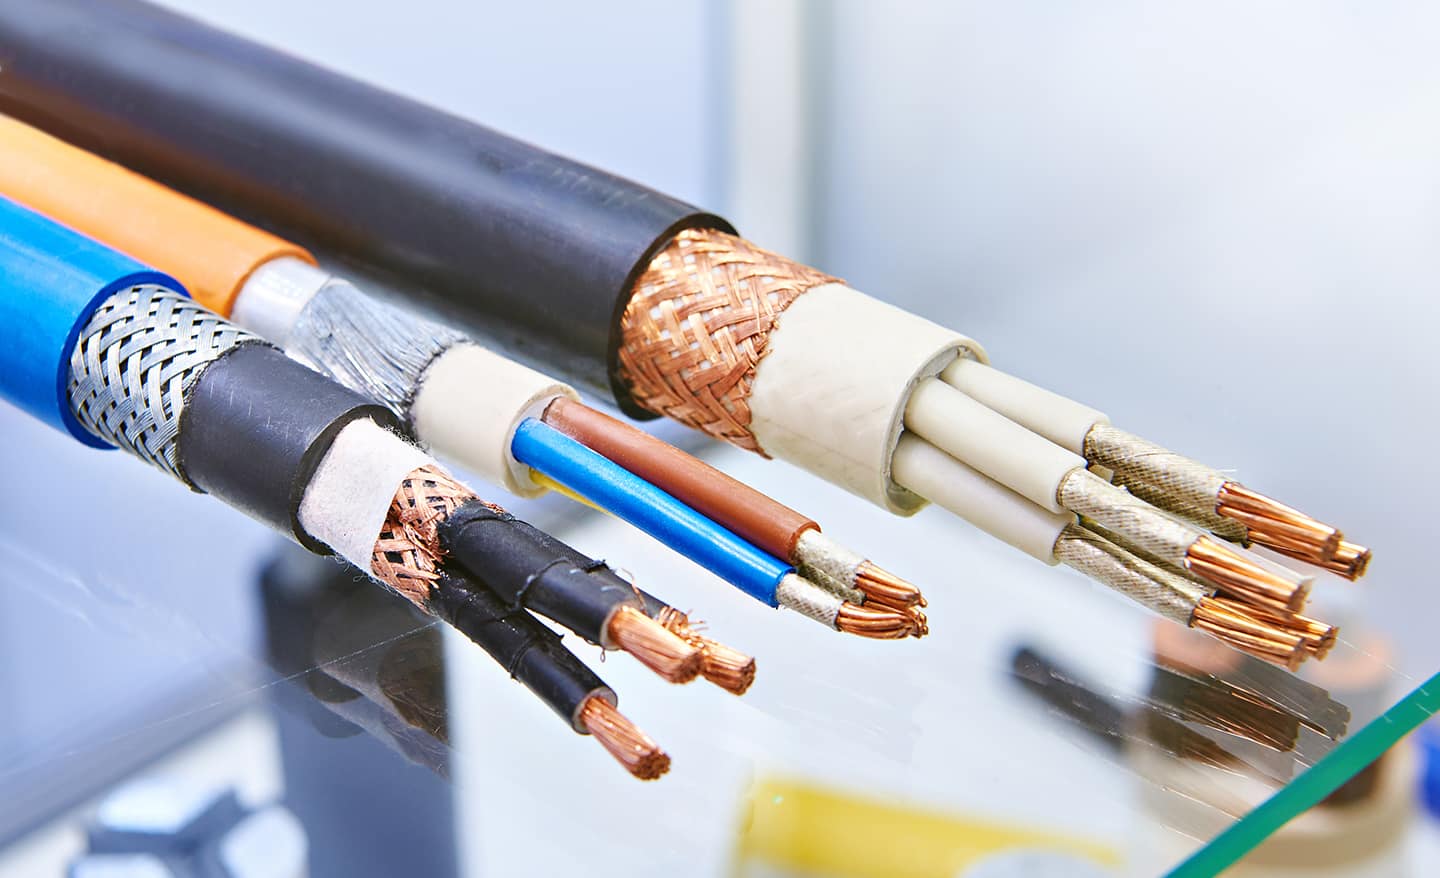 Wires And Cables Essentials: Powering Your Home Safely